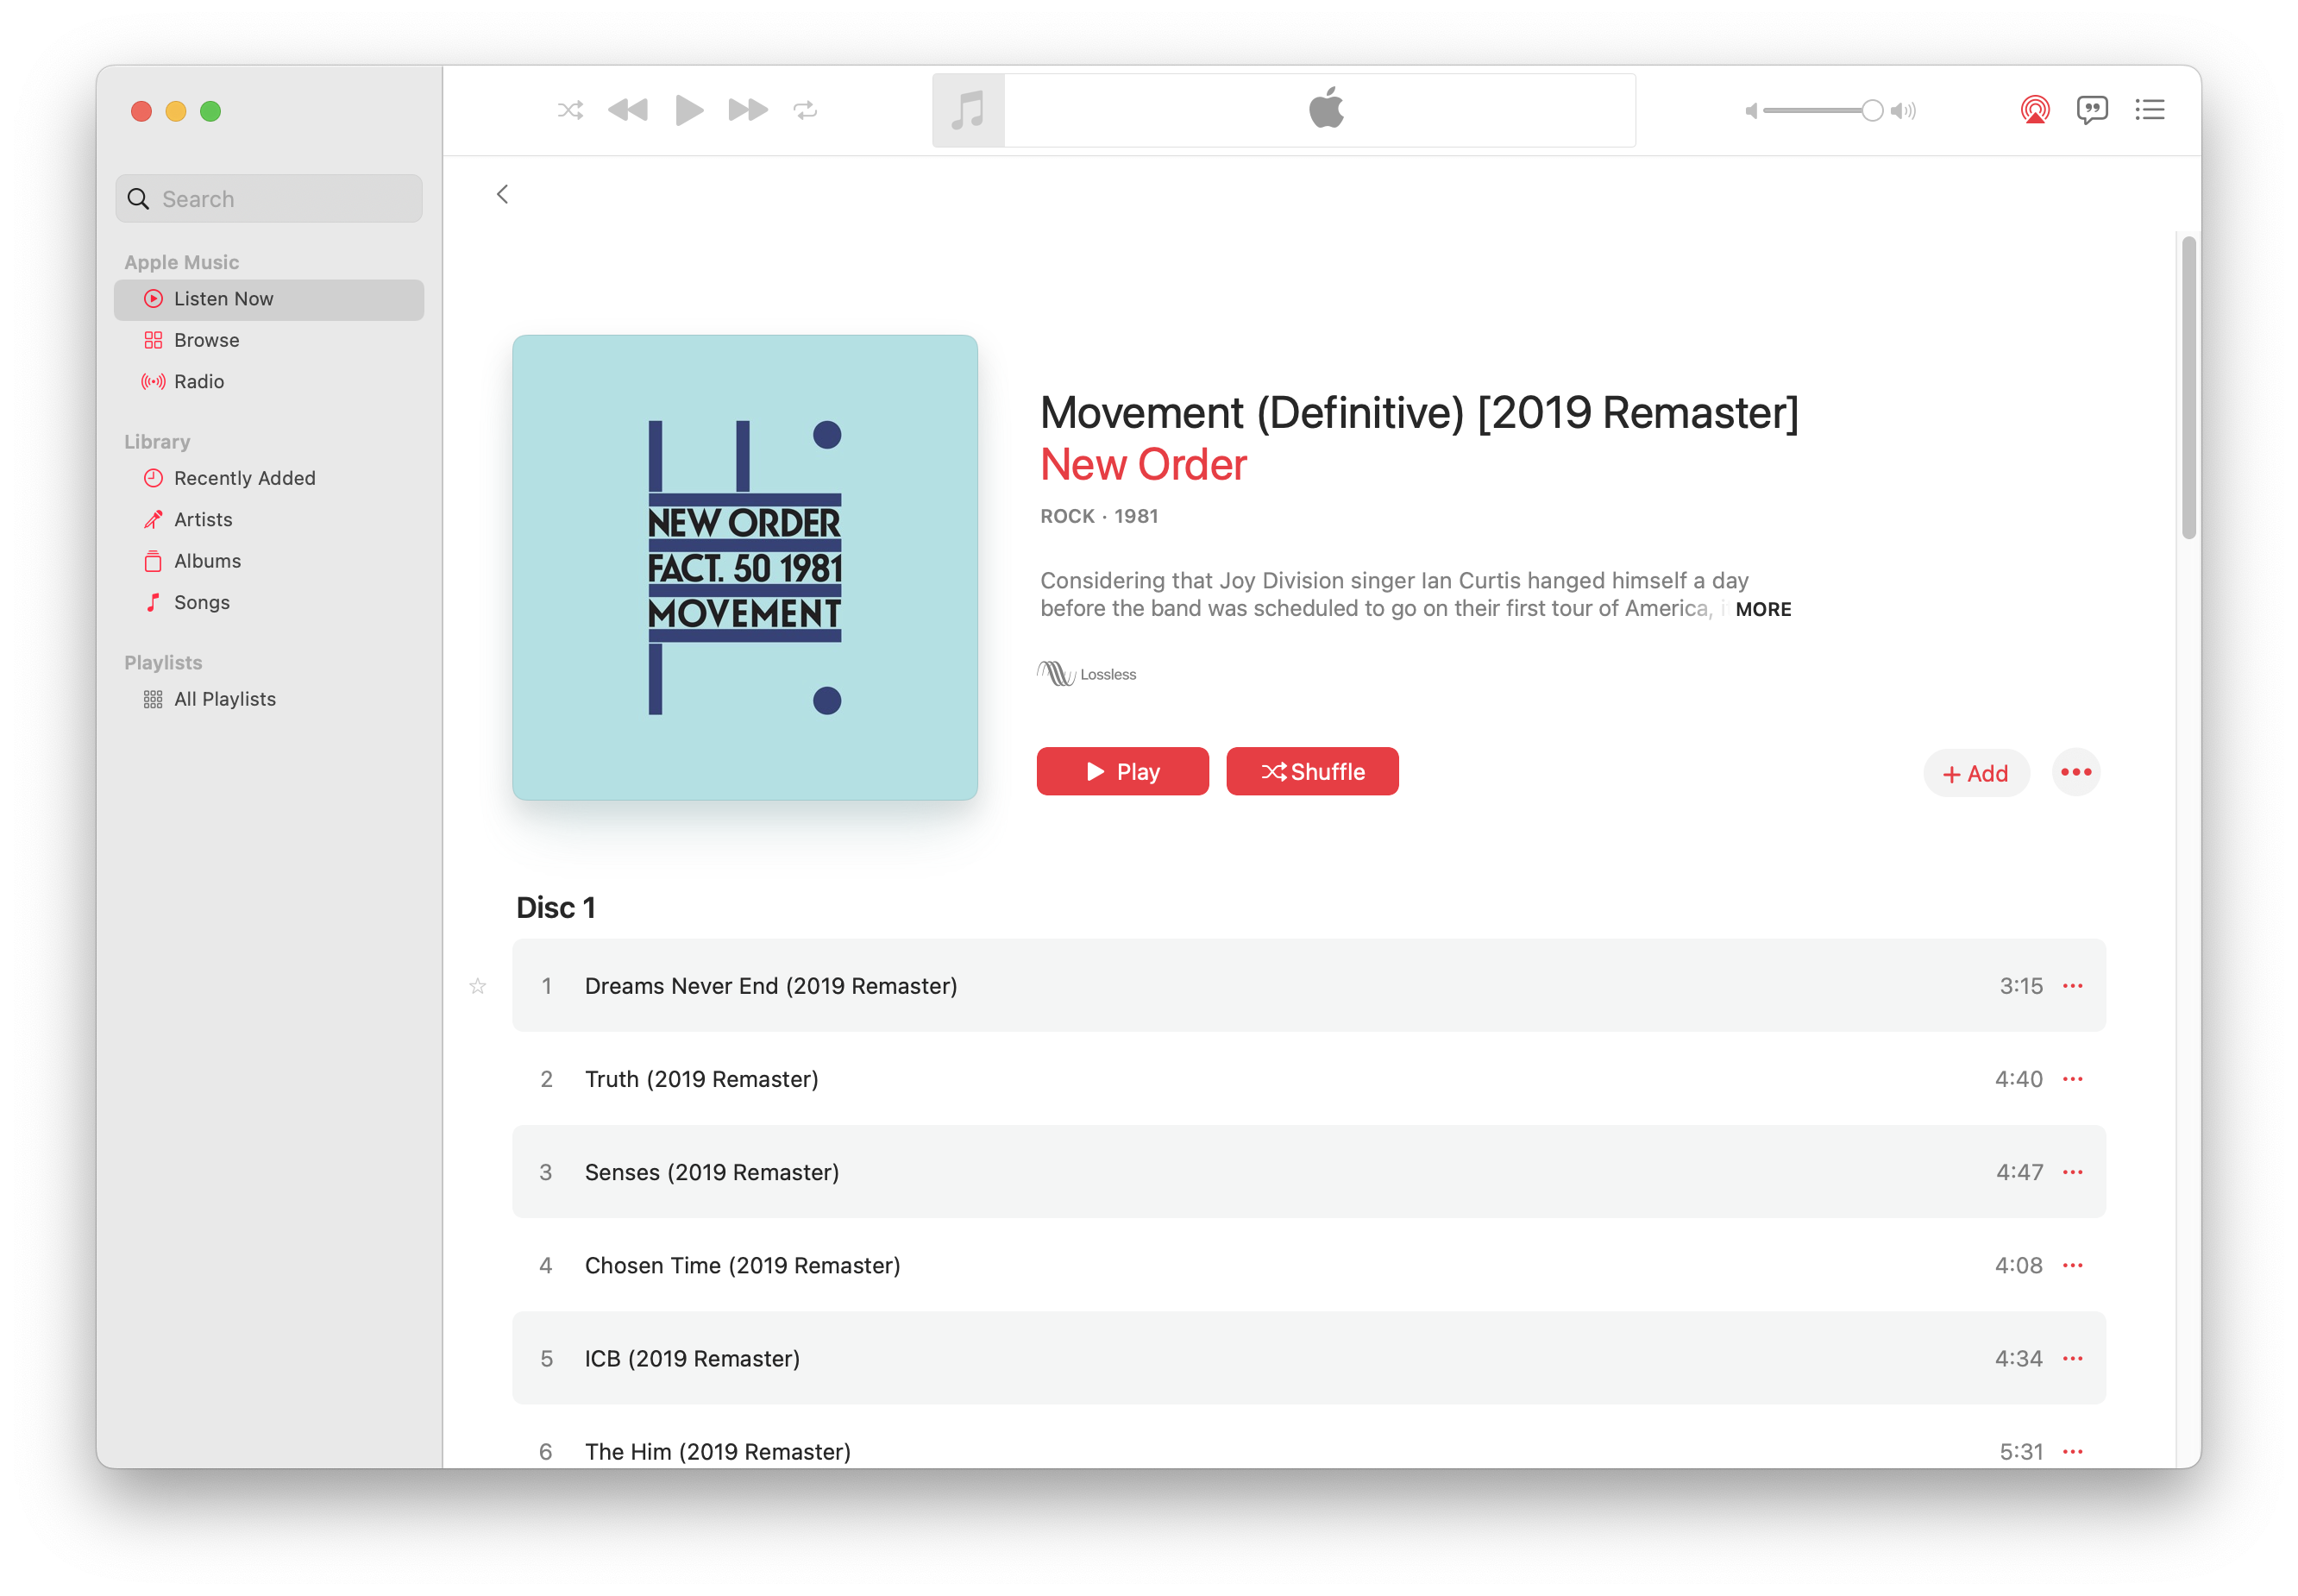 New Order's Movement remaster, on Apple Music